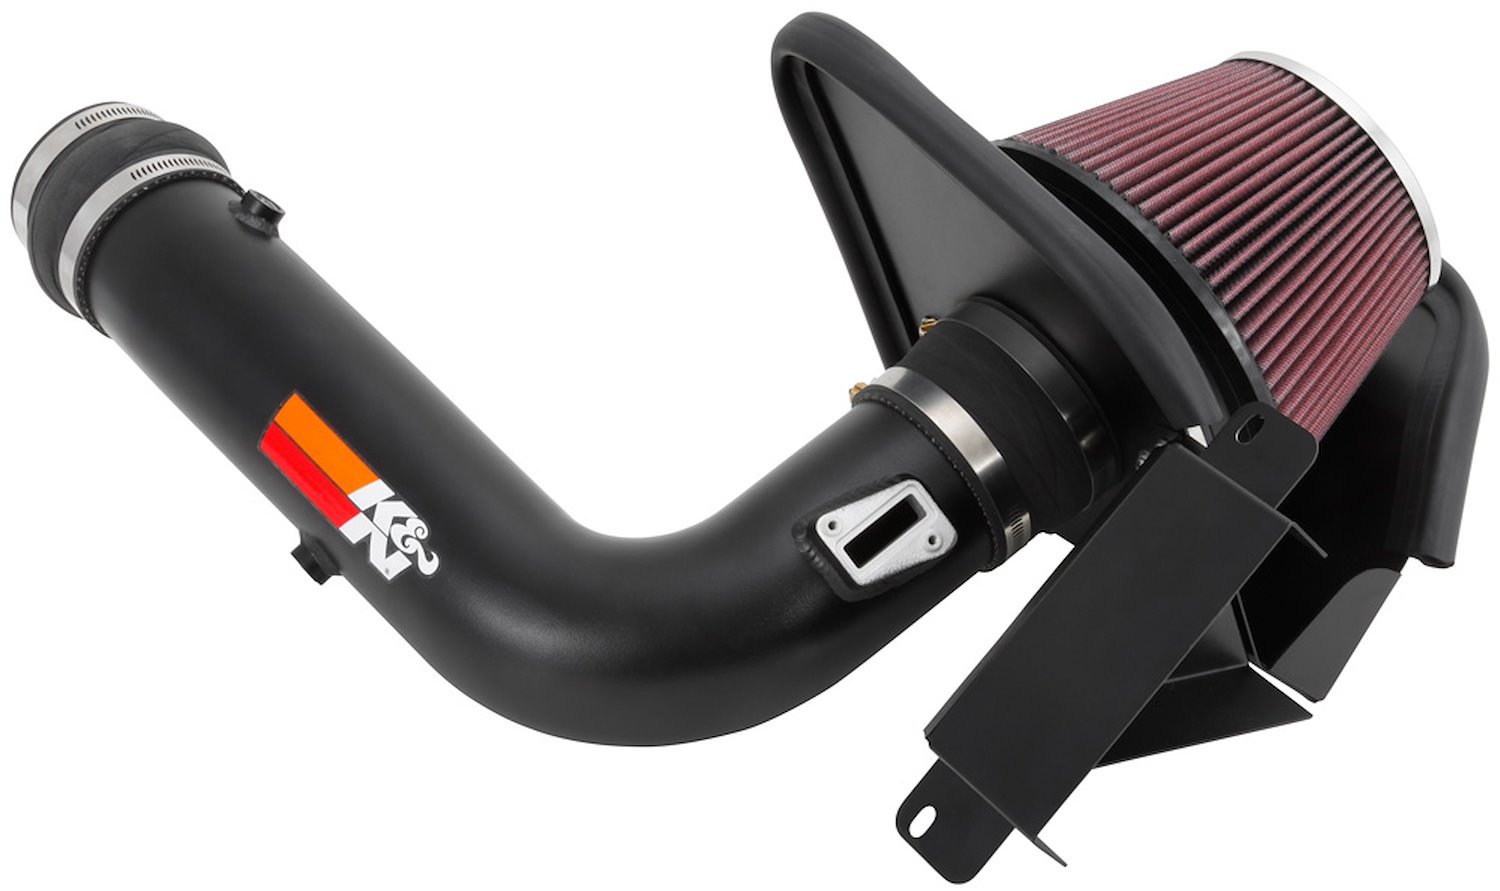 77-2576KTK Series 77 High-Flow Performance Air Intake System for 2013-2019 Ford Flex, Taurus w/3.5L Non-Turbo Engine